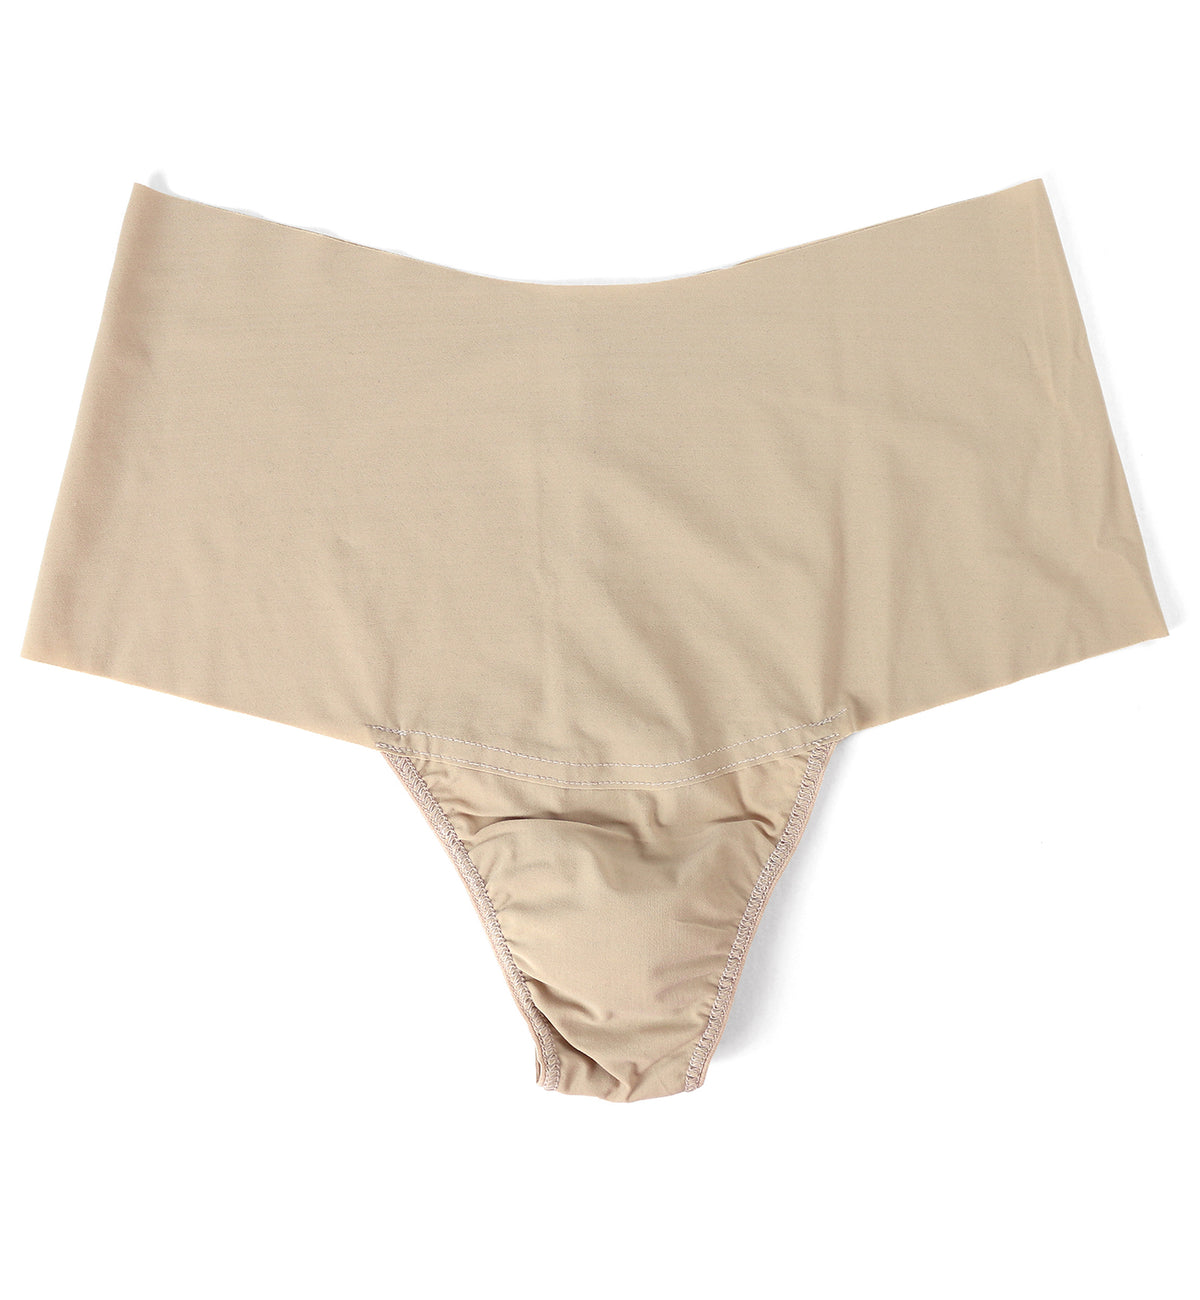 Hanky Panky BreatheSoft Hi-Rise Thong (6J1921B),Small,Taupe - Taupe,Small